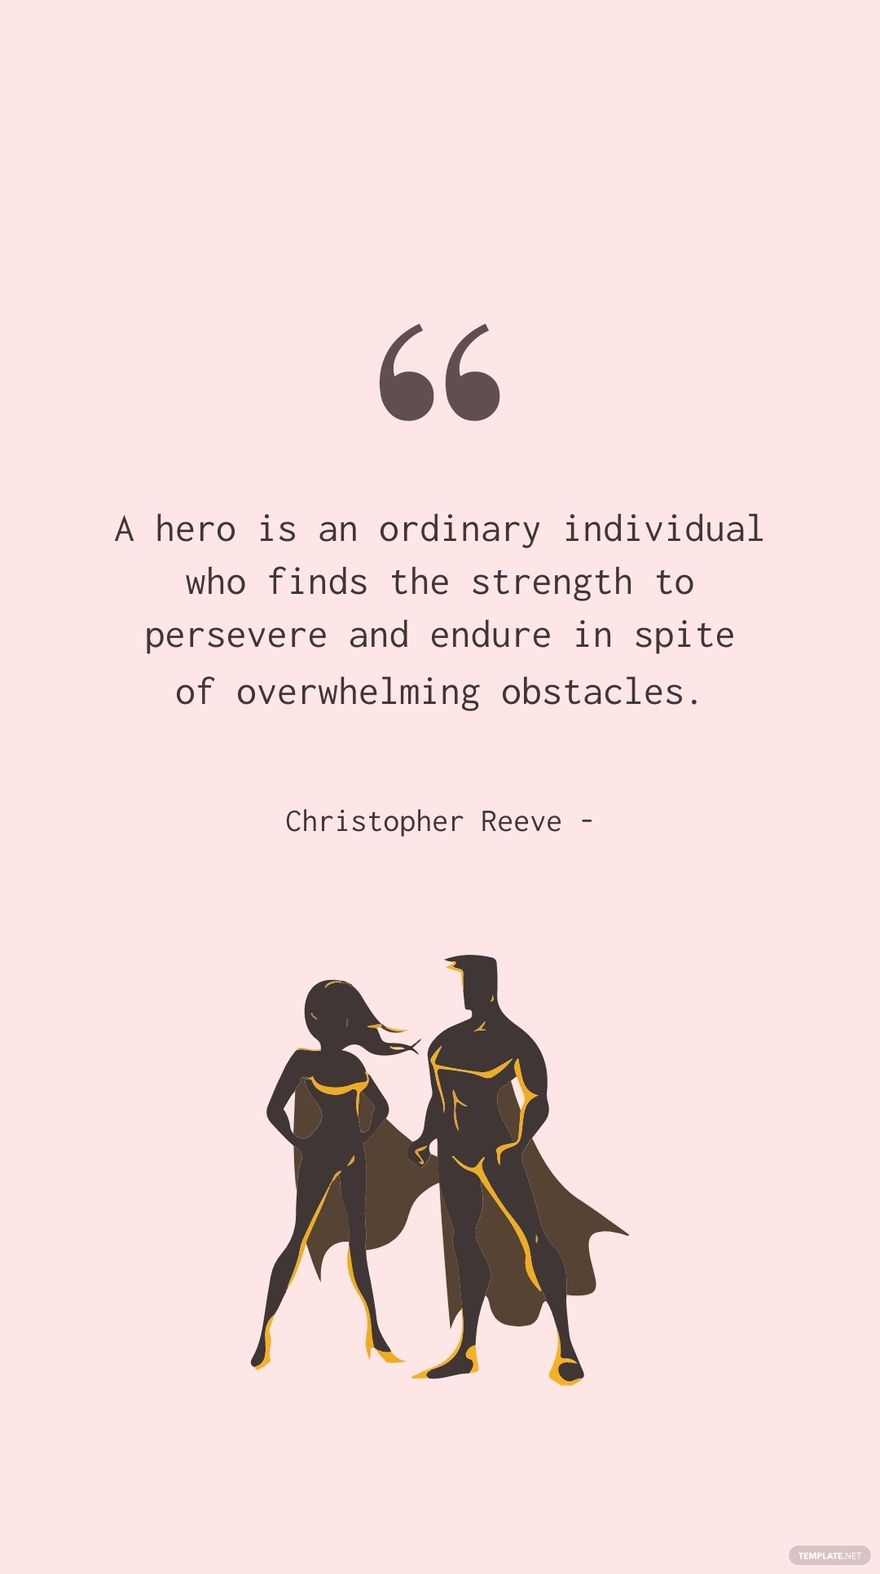 Christopher Reeve - A hero is an ordinary individual who finds the strength to persevere and endure in spite of overwhelming obstacles. in JPG